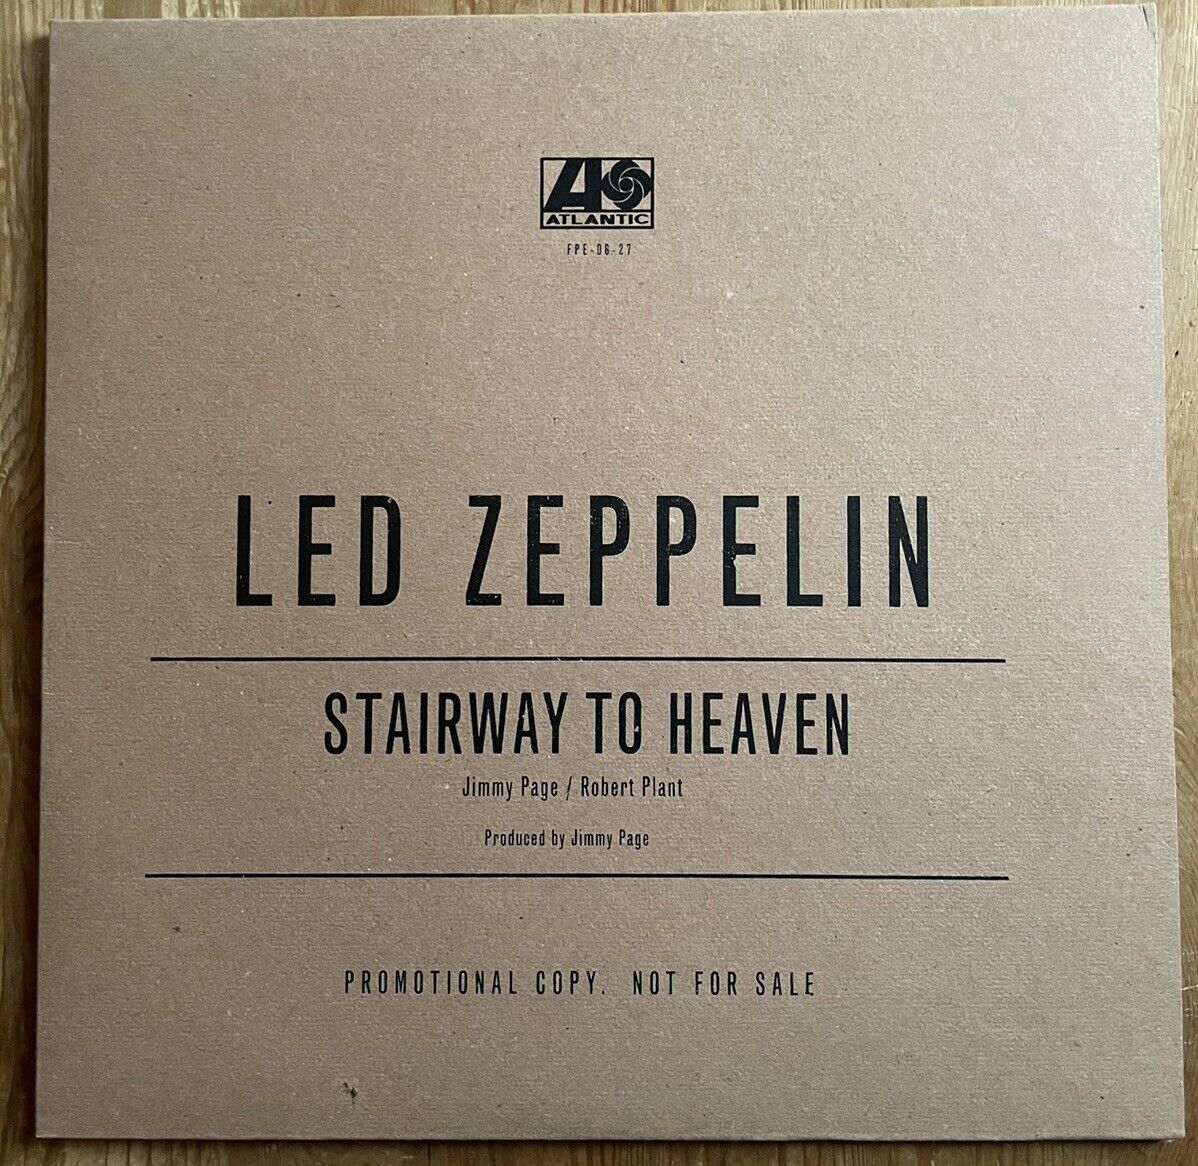 LED ZEPPELIN Stairway To Heaven 12” Single Aleister Crowley RARE MINT Classic